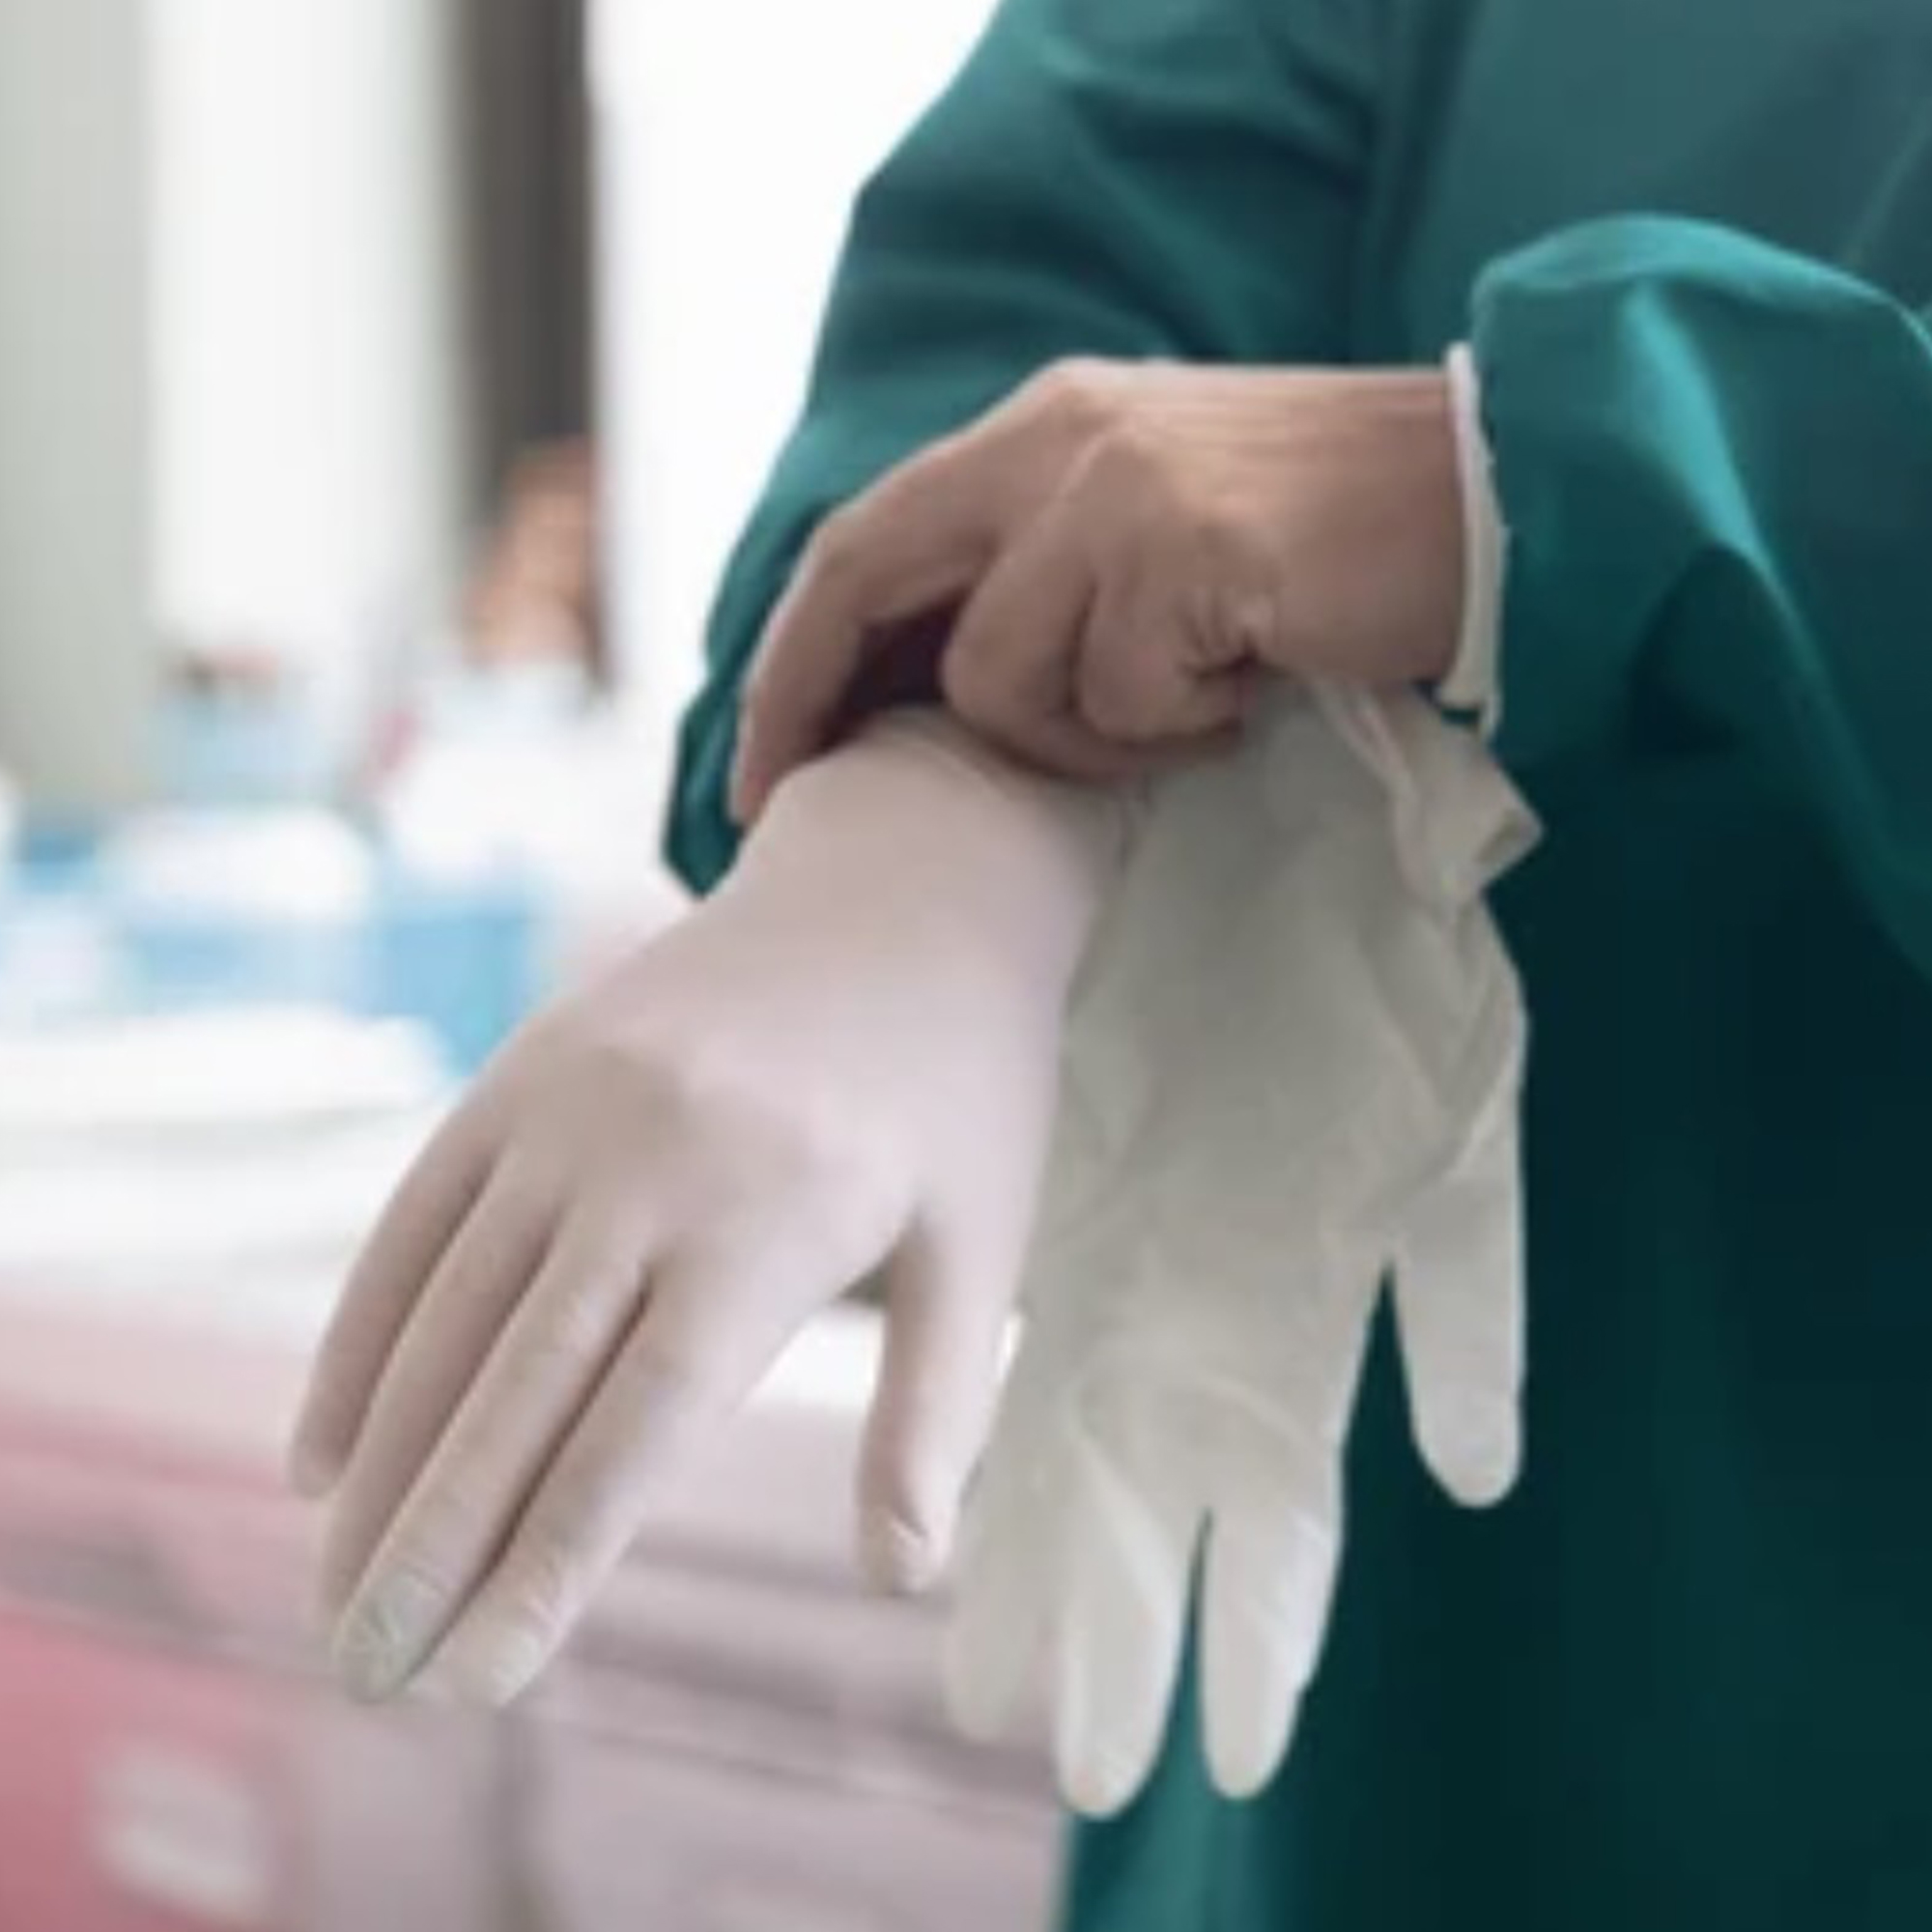 Medical practice/MEDICAL EXAMINATION AND SURGICAL GLOVES/Sterile Surgical Medical Gloves